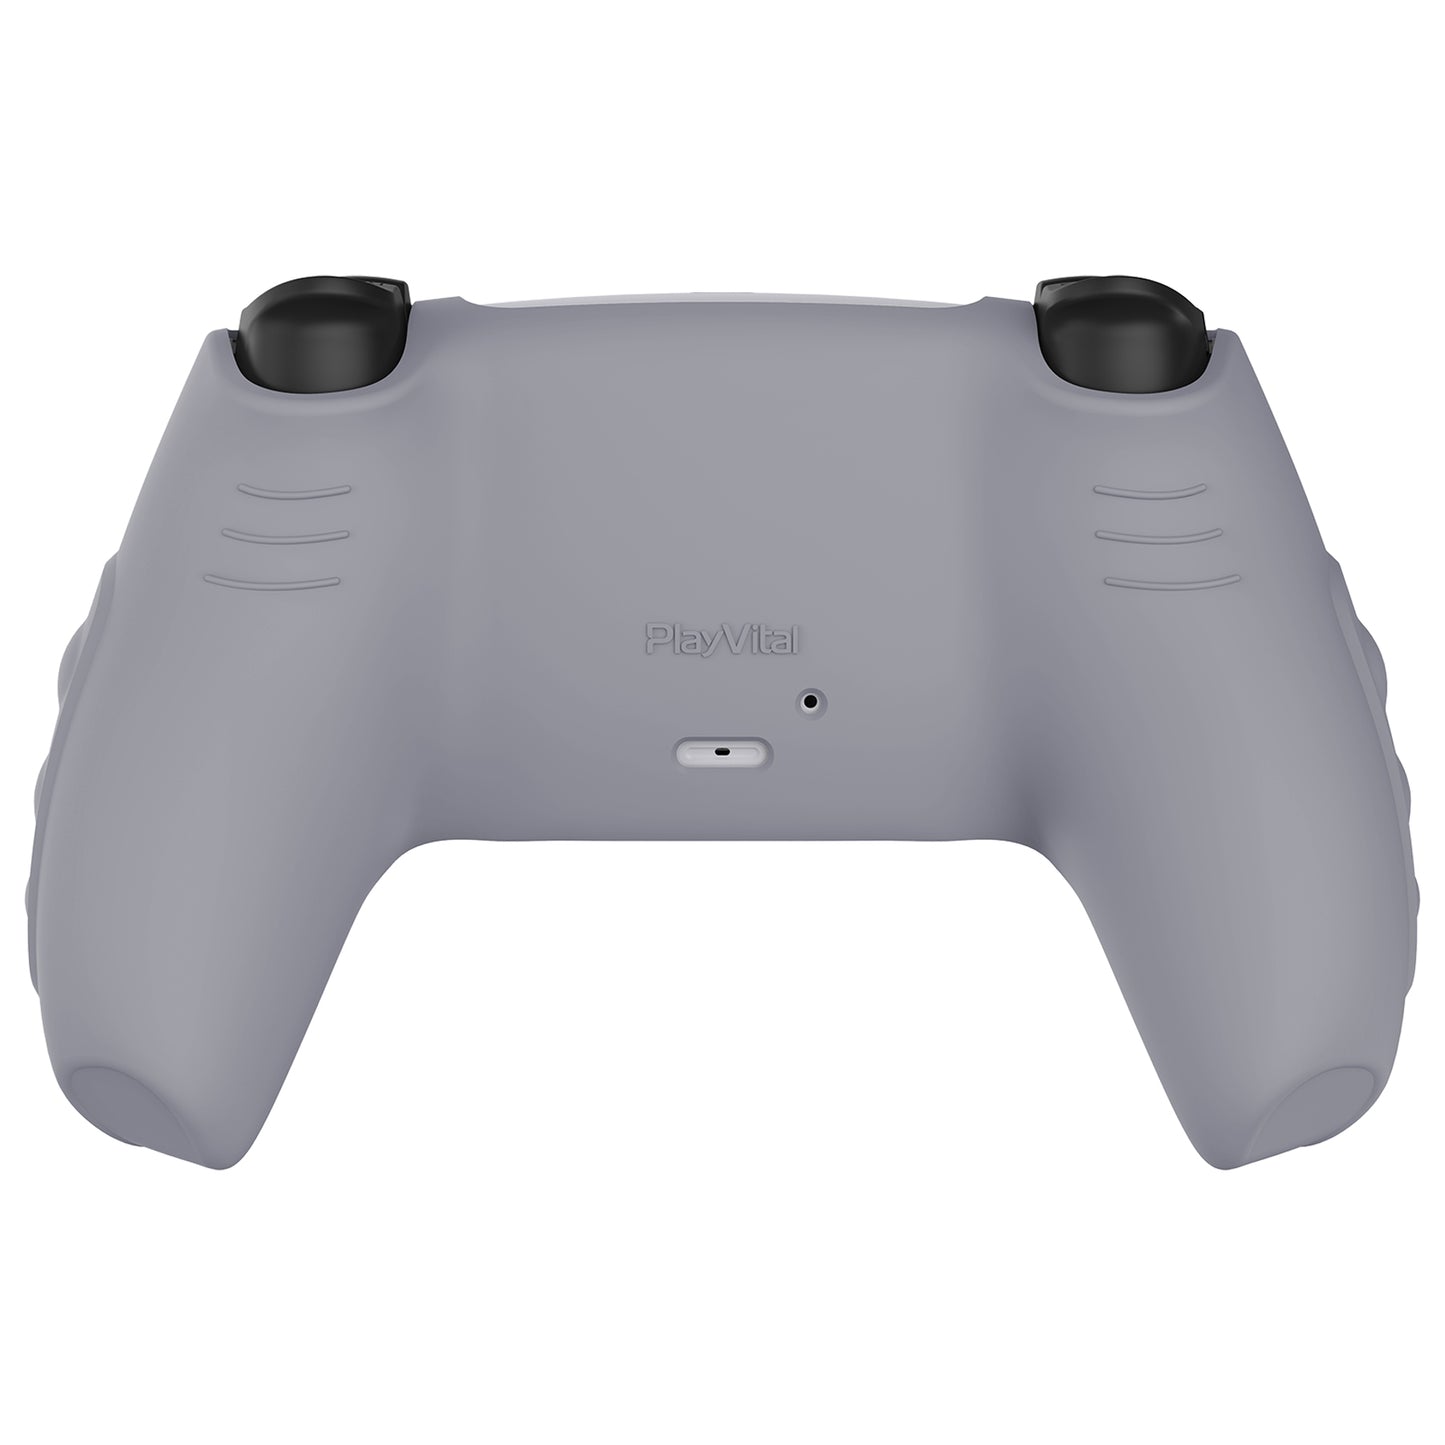 PlayVital Knight Edition Anti-Slip Silicone Cover Skin with Thumb Grip Caps for PS5 Wireless Controller - Metallic Gray & Dark Gray - QSPF011 PlayVital